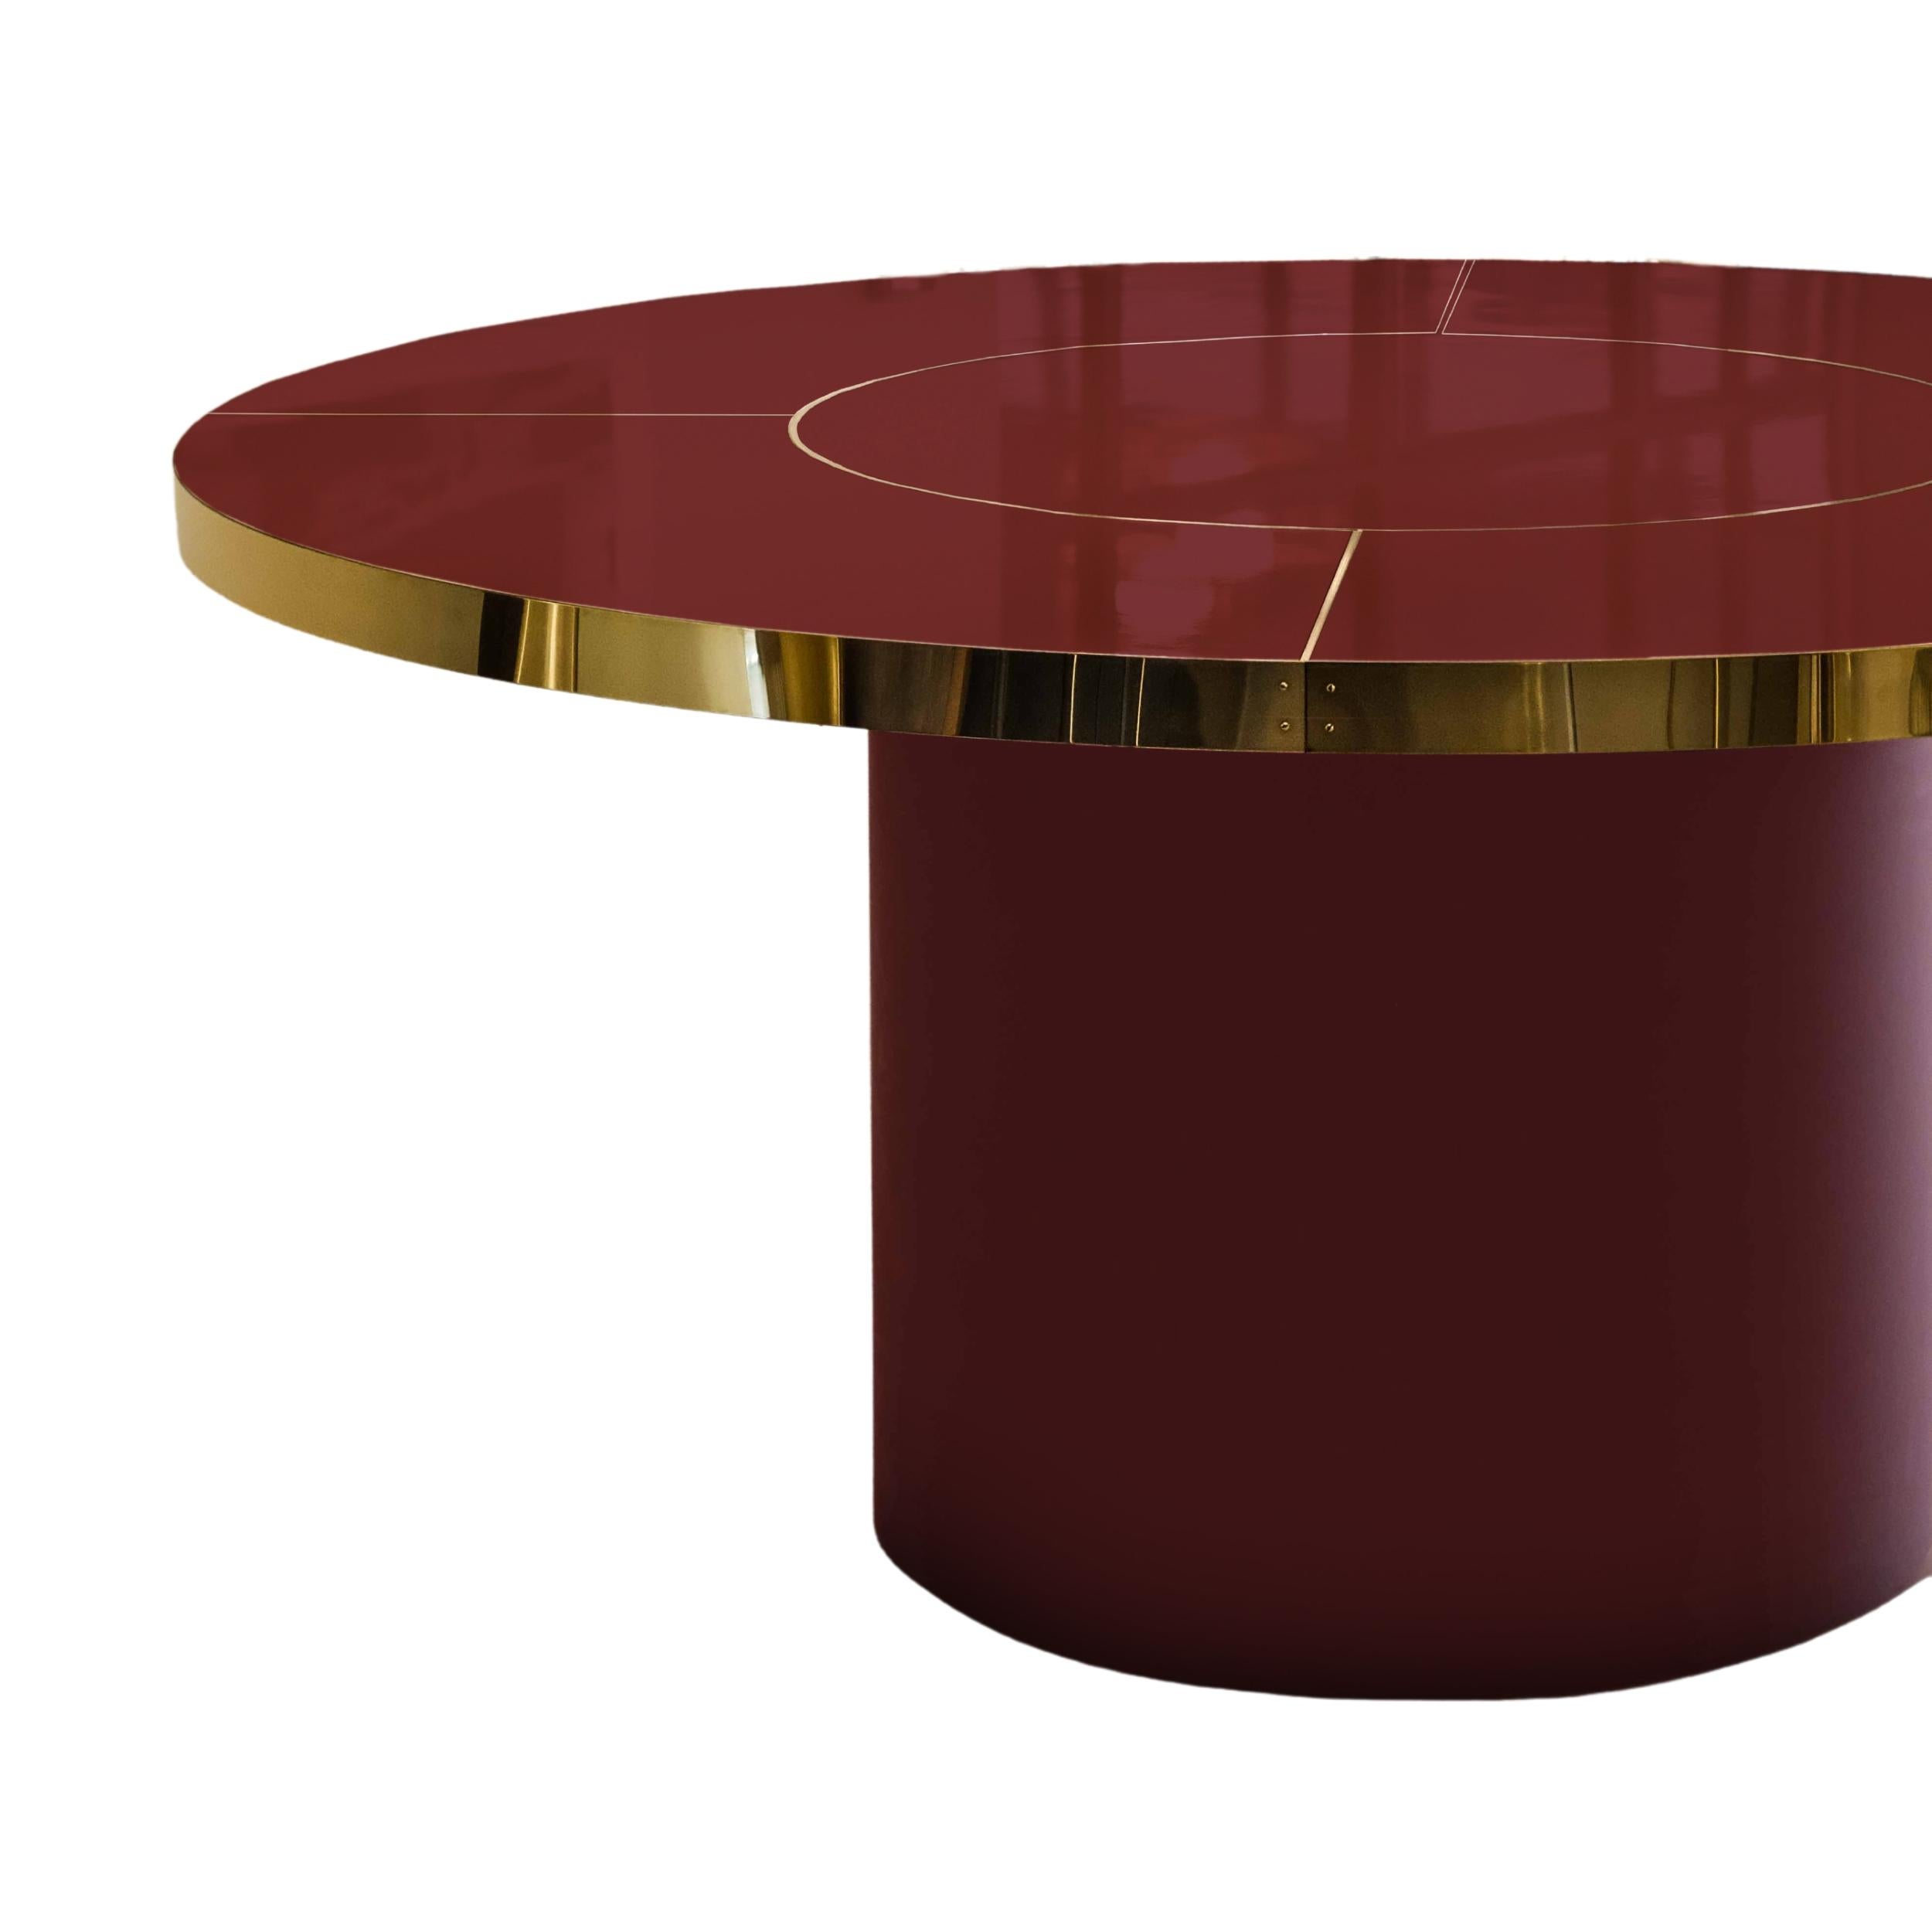 Retro Design Round Dining Table Palm Springs Style High Gloss Laminated & Brass Details Extra XXL Size

Discover our incredible collection of retro-style design tables inspired by the iconic decoration of the 1950s, 60s, and 70s of Palm Springs in